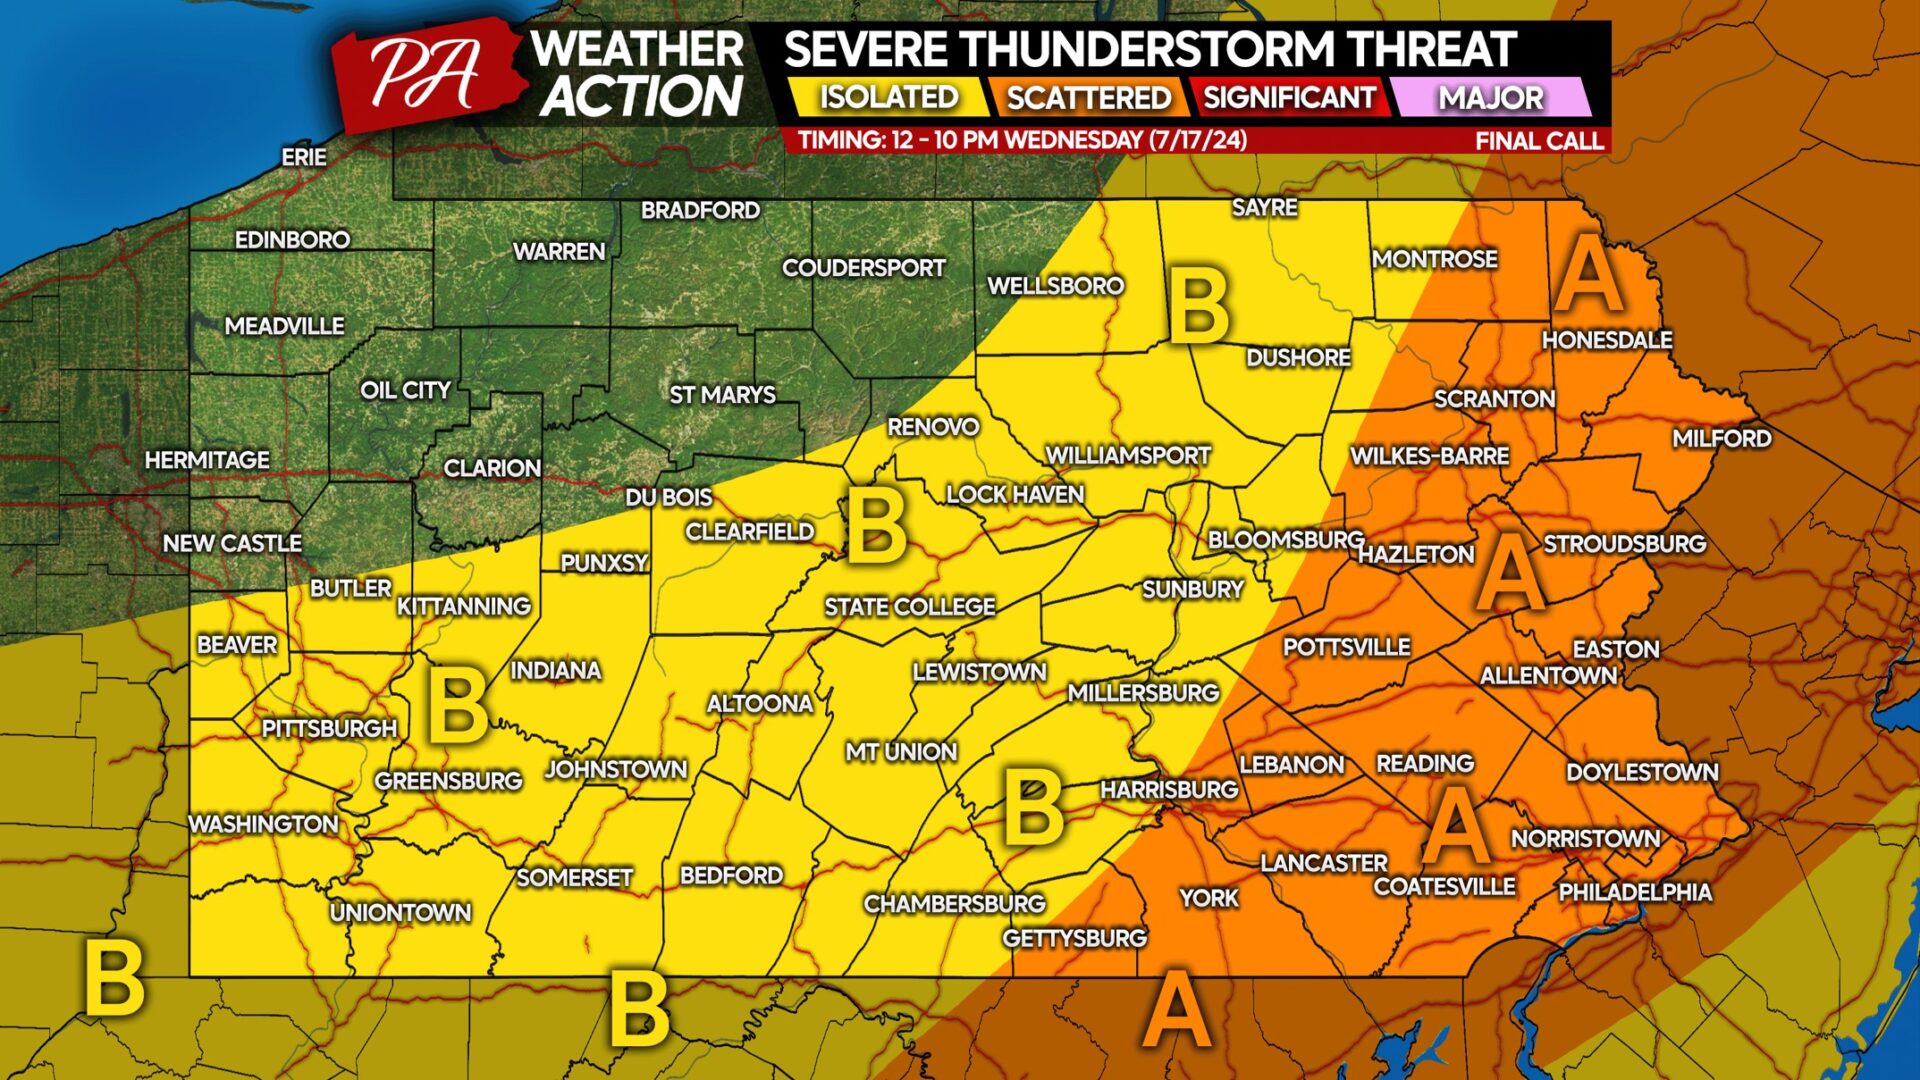 Final Severe Thunderstorm Threat Comes Wednesday As Cold Front Will End Heat Wave Soon After; New Pattern Coming?